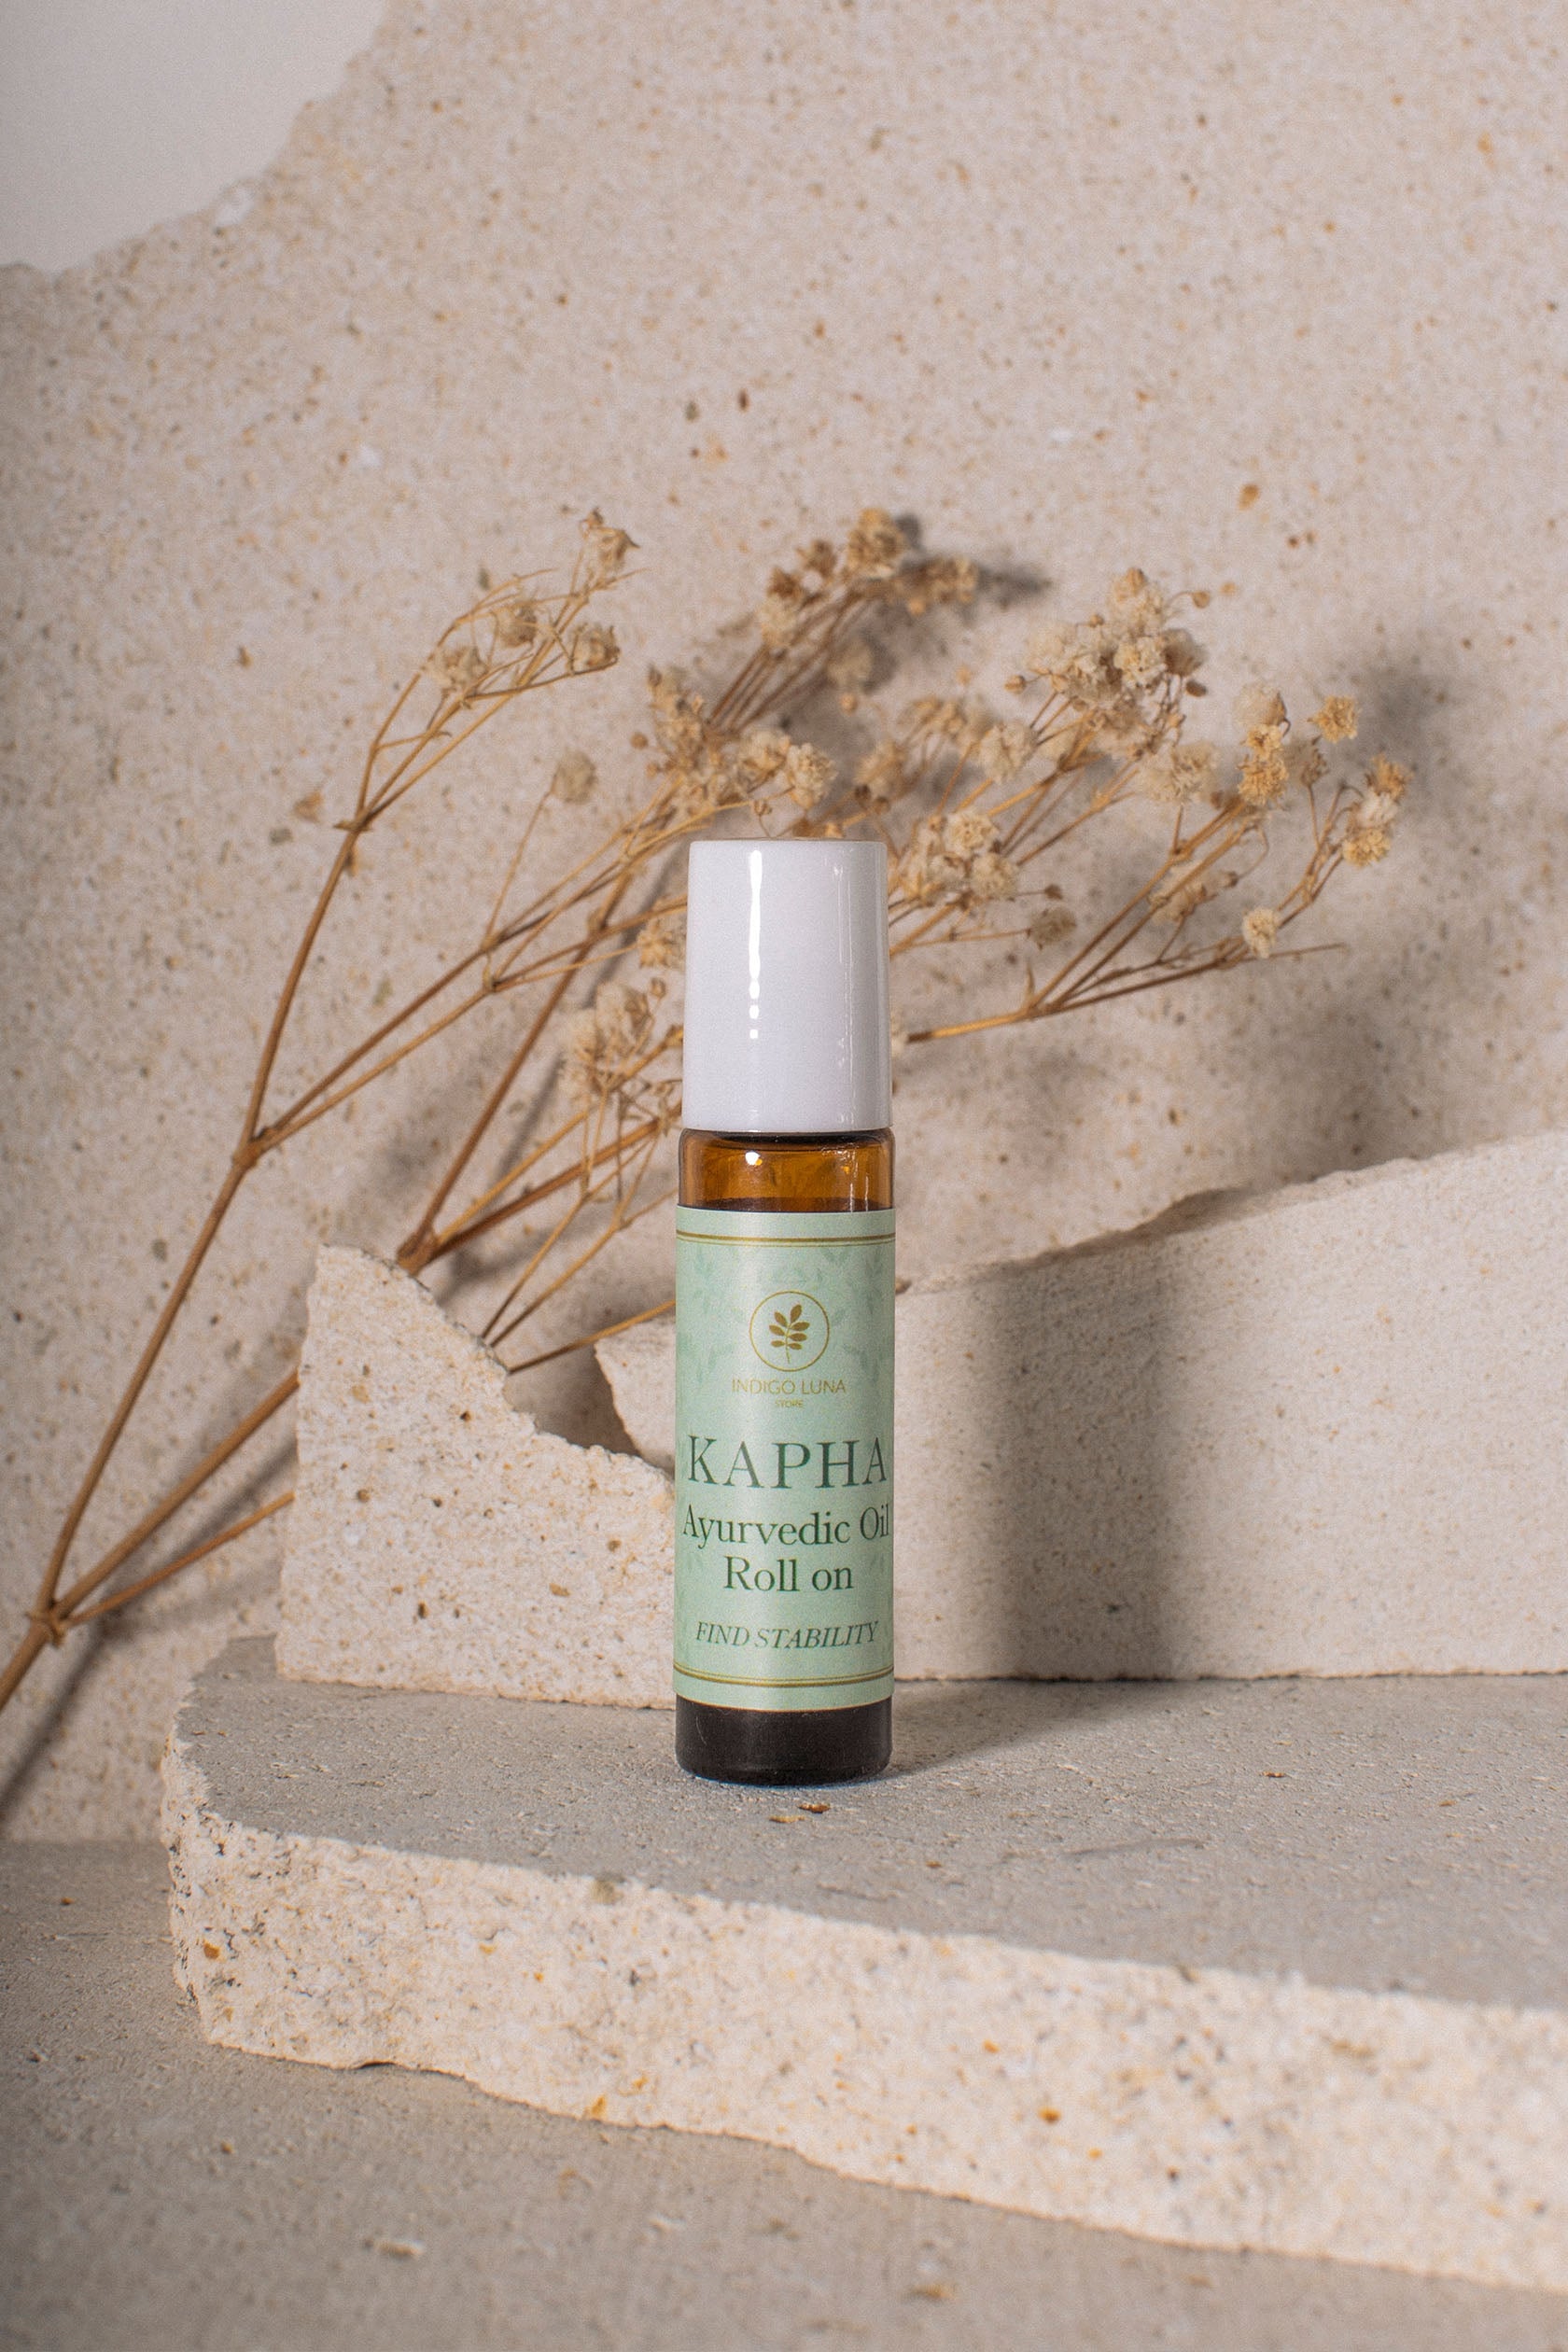 Ayurvedic essential oil for Kapha Dosha in a Roll on bottle